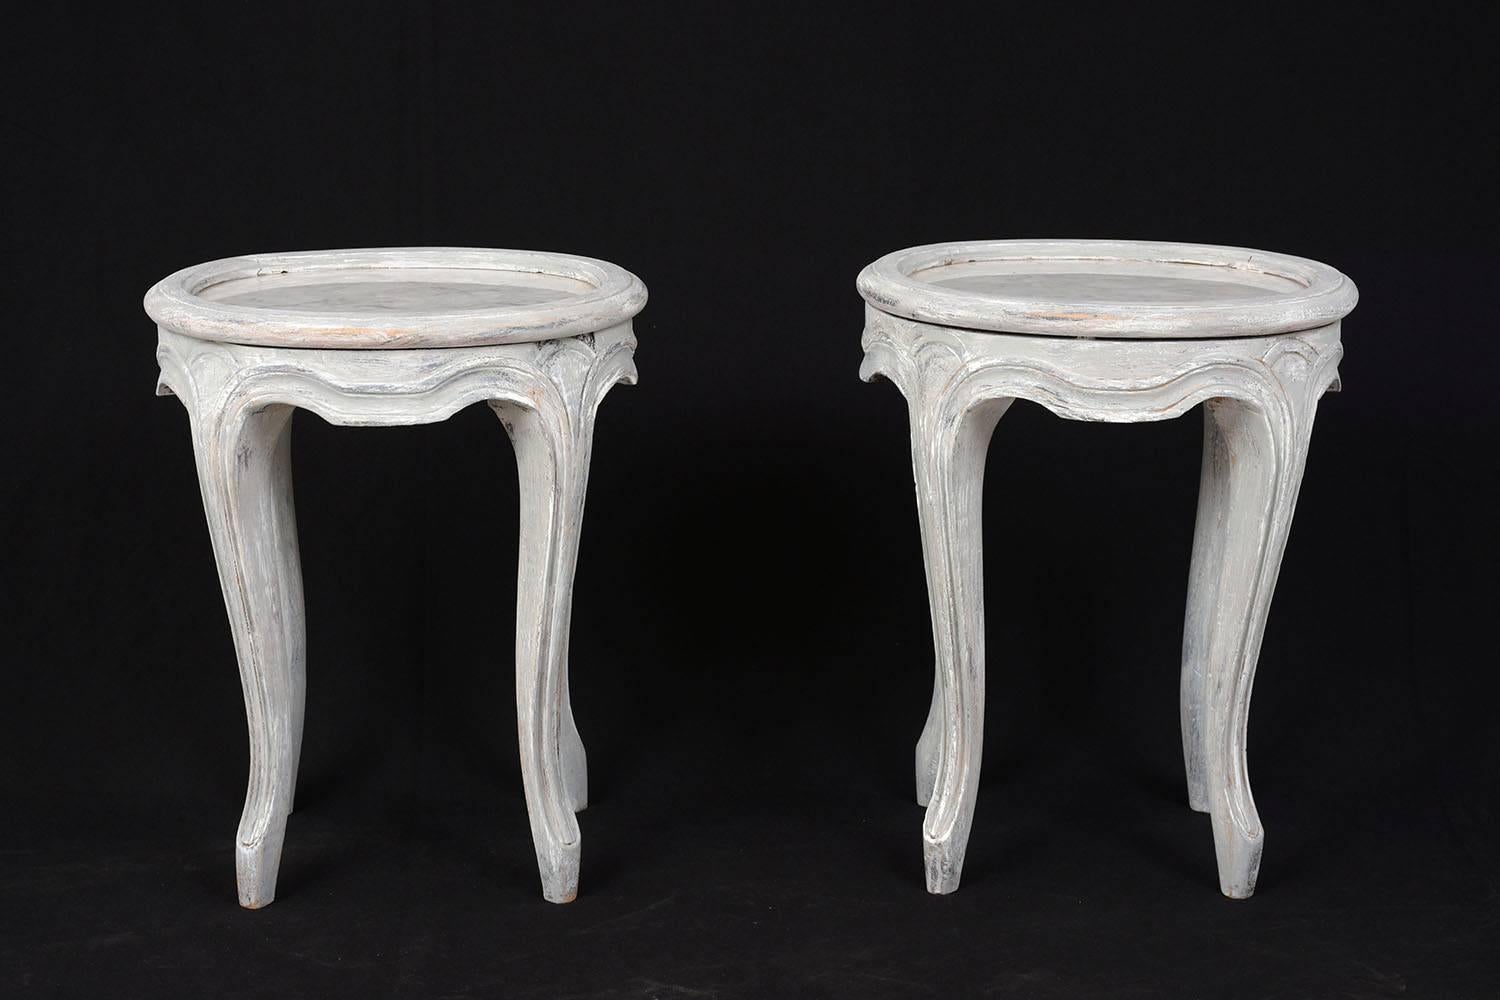 This pair of 1900s Provincial-style garden stools are made of carved oak wood painted in a gray and off-white color combination with a distressed finish. The stools have carved moulding accents and cabriole legs with padded feet. There is white